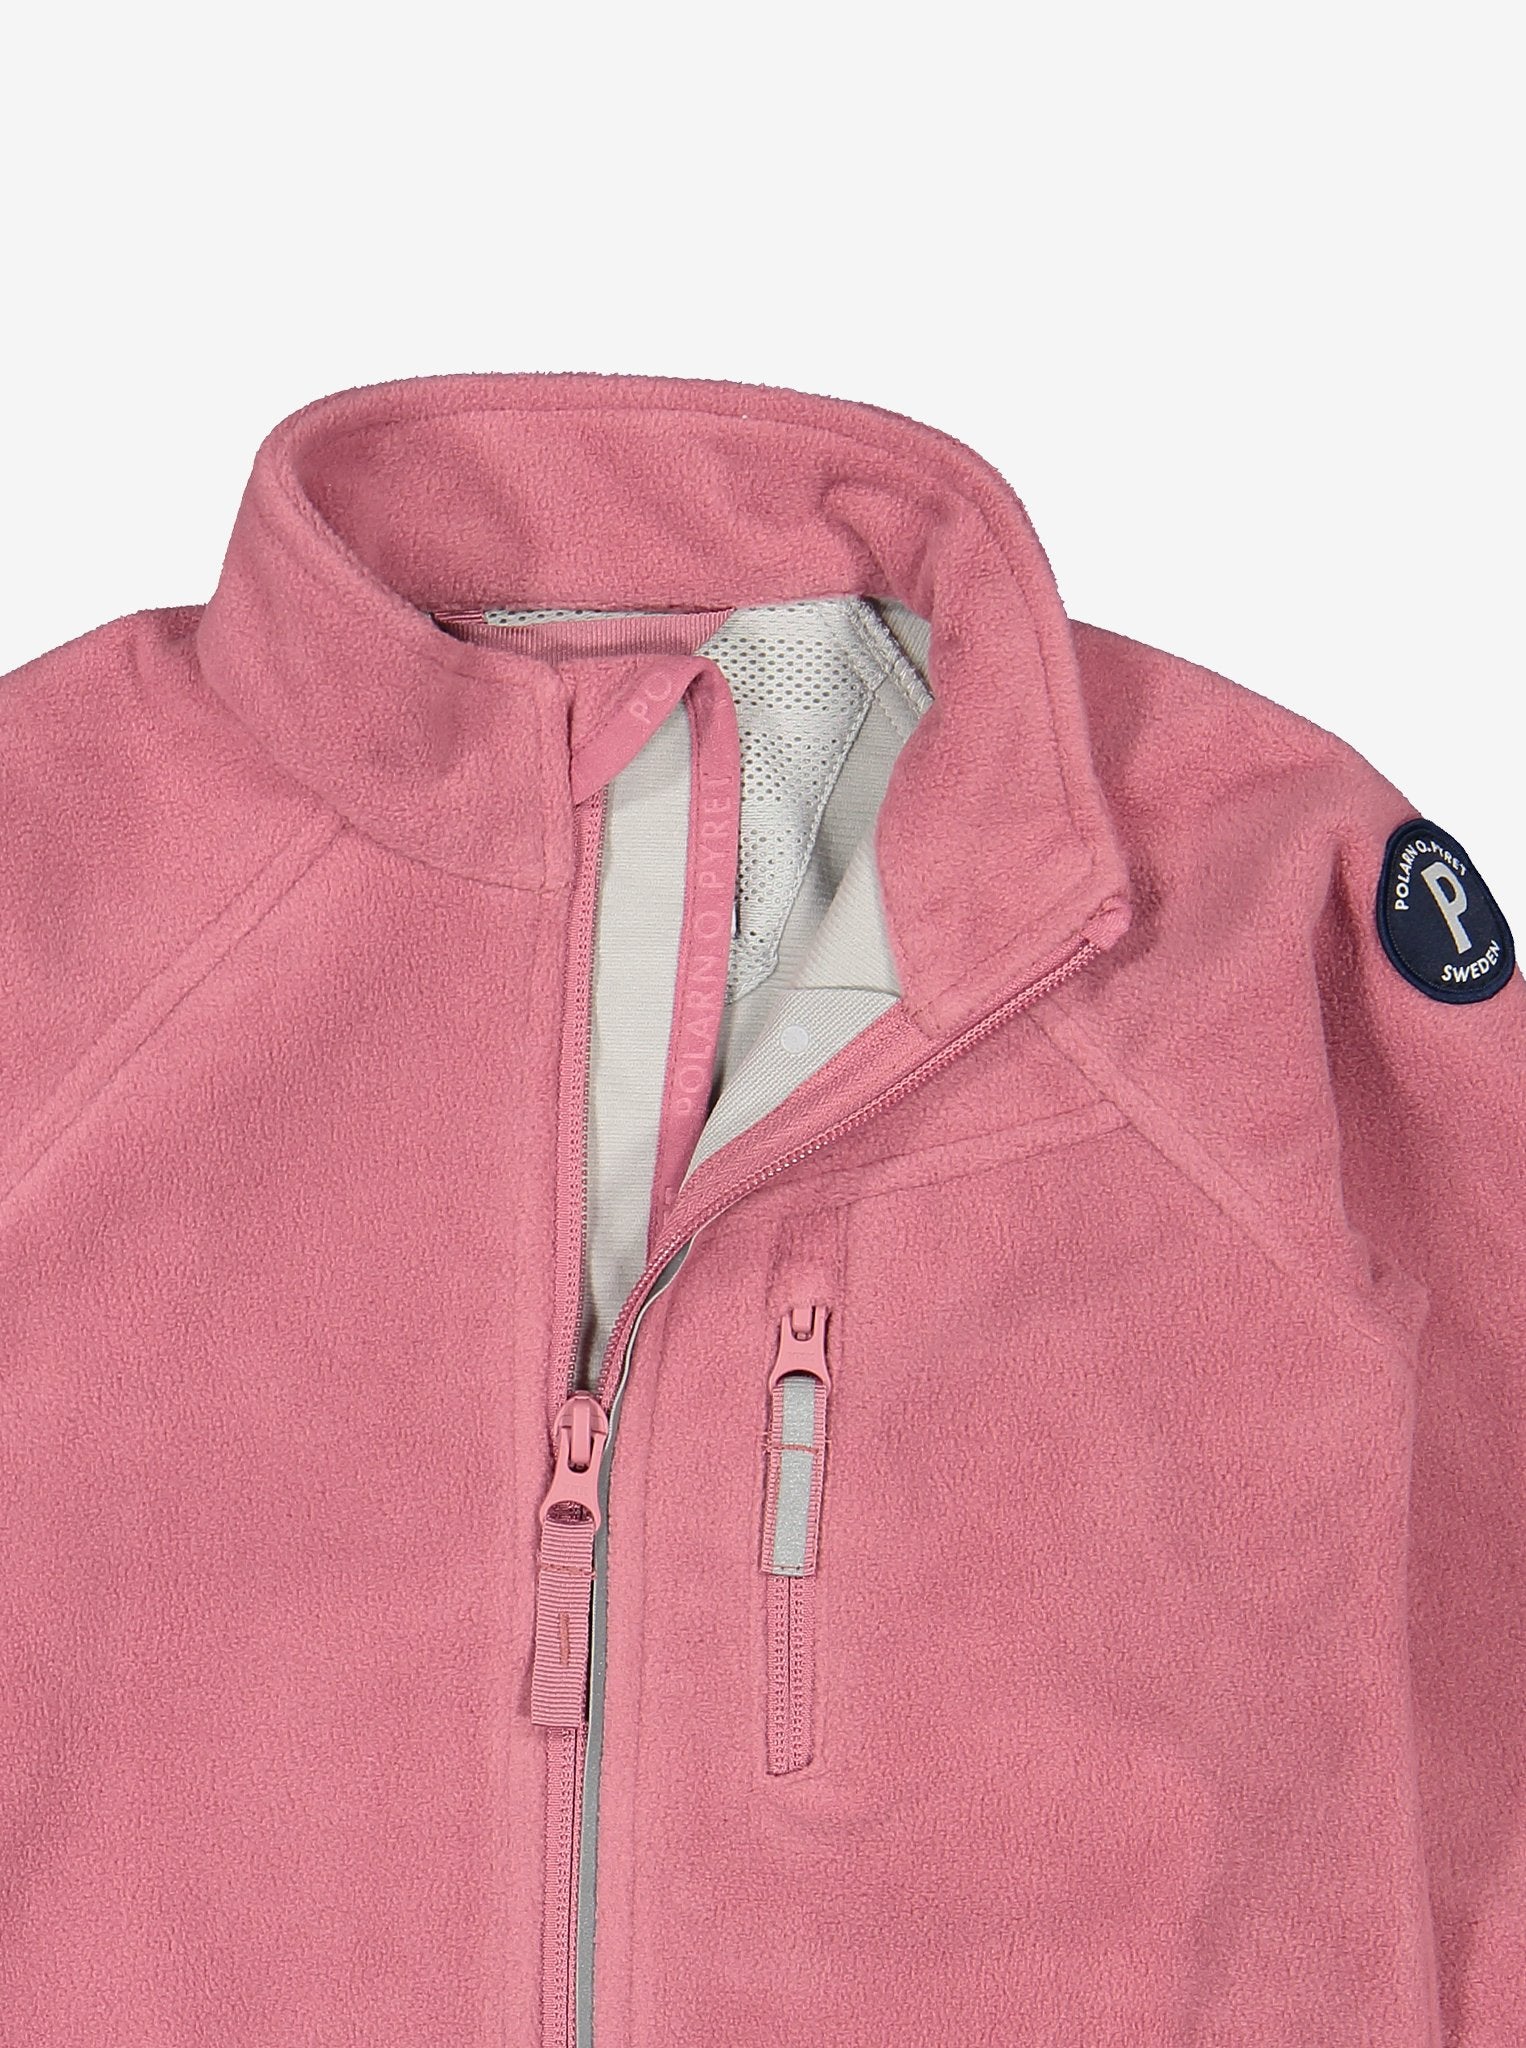 kids pink waterproof fleece jacket, used from recycled materials, comfortable and flexible, ethical quality polarn o. pyret 